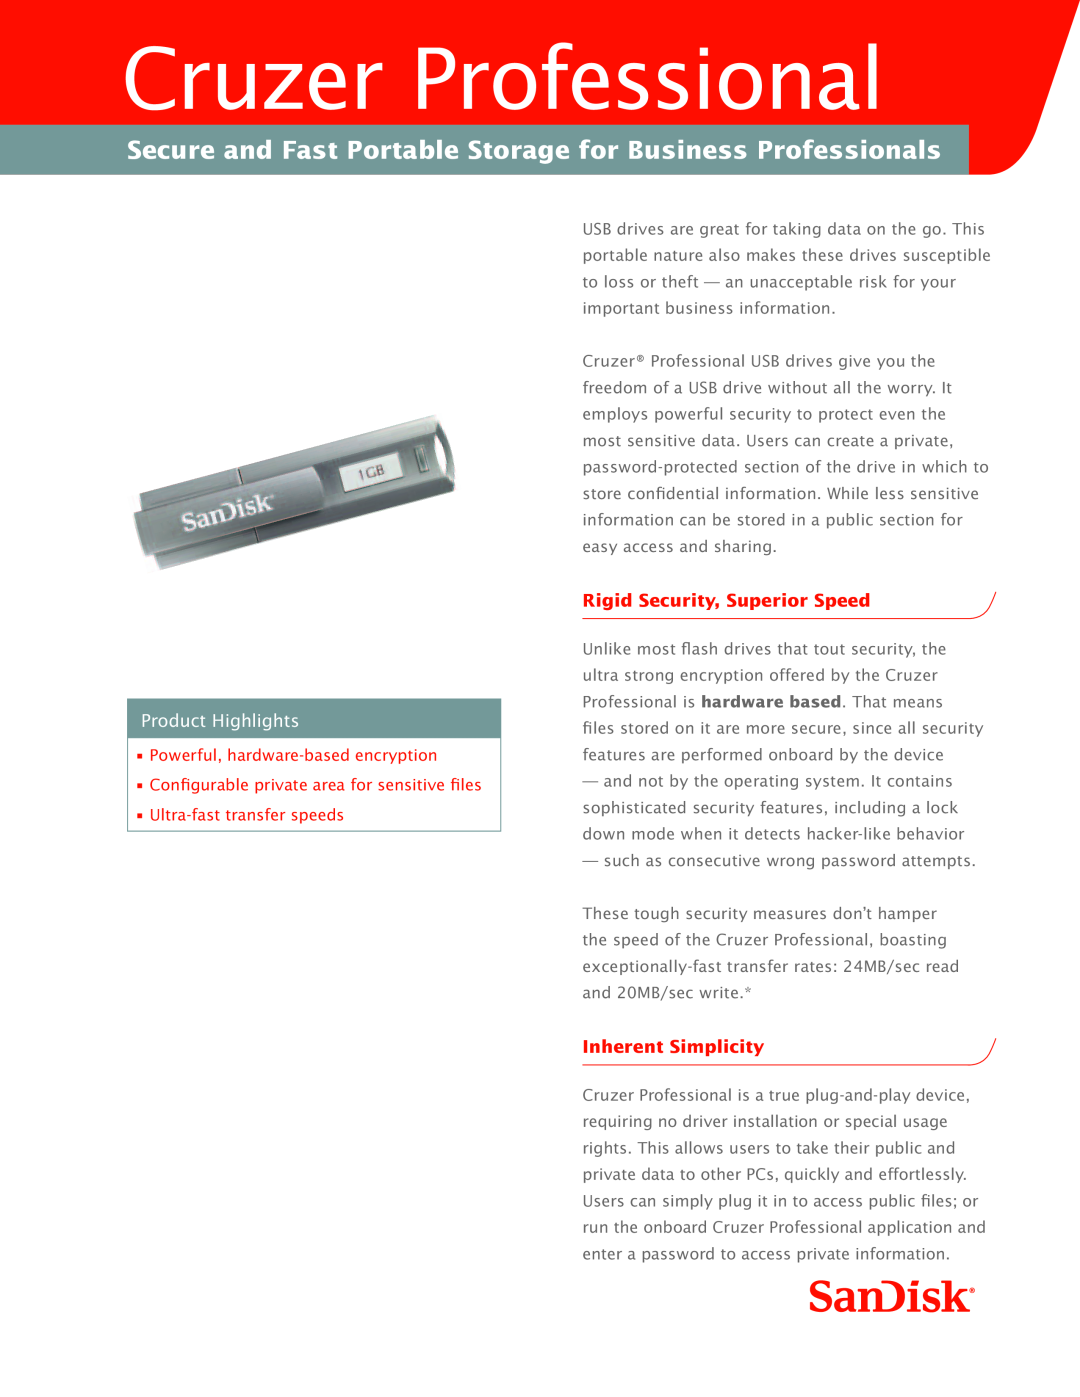 SanDisk Cruzer Professional manual Rigid Security, Superior Speed, Inherent Simplicity, Product Highlights 